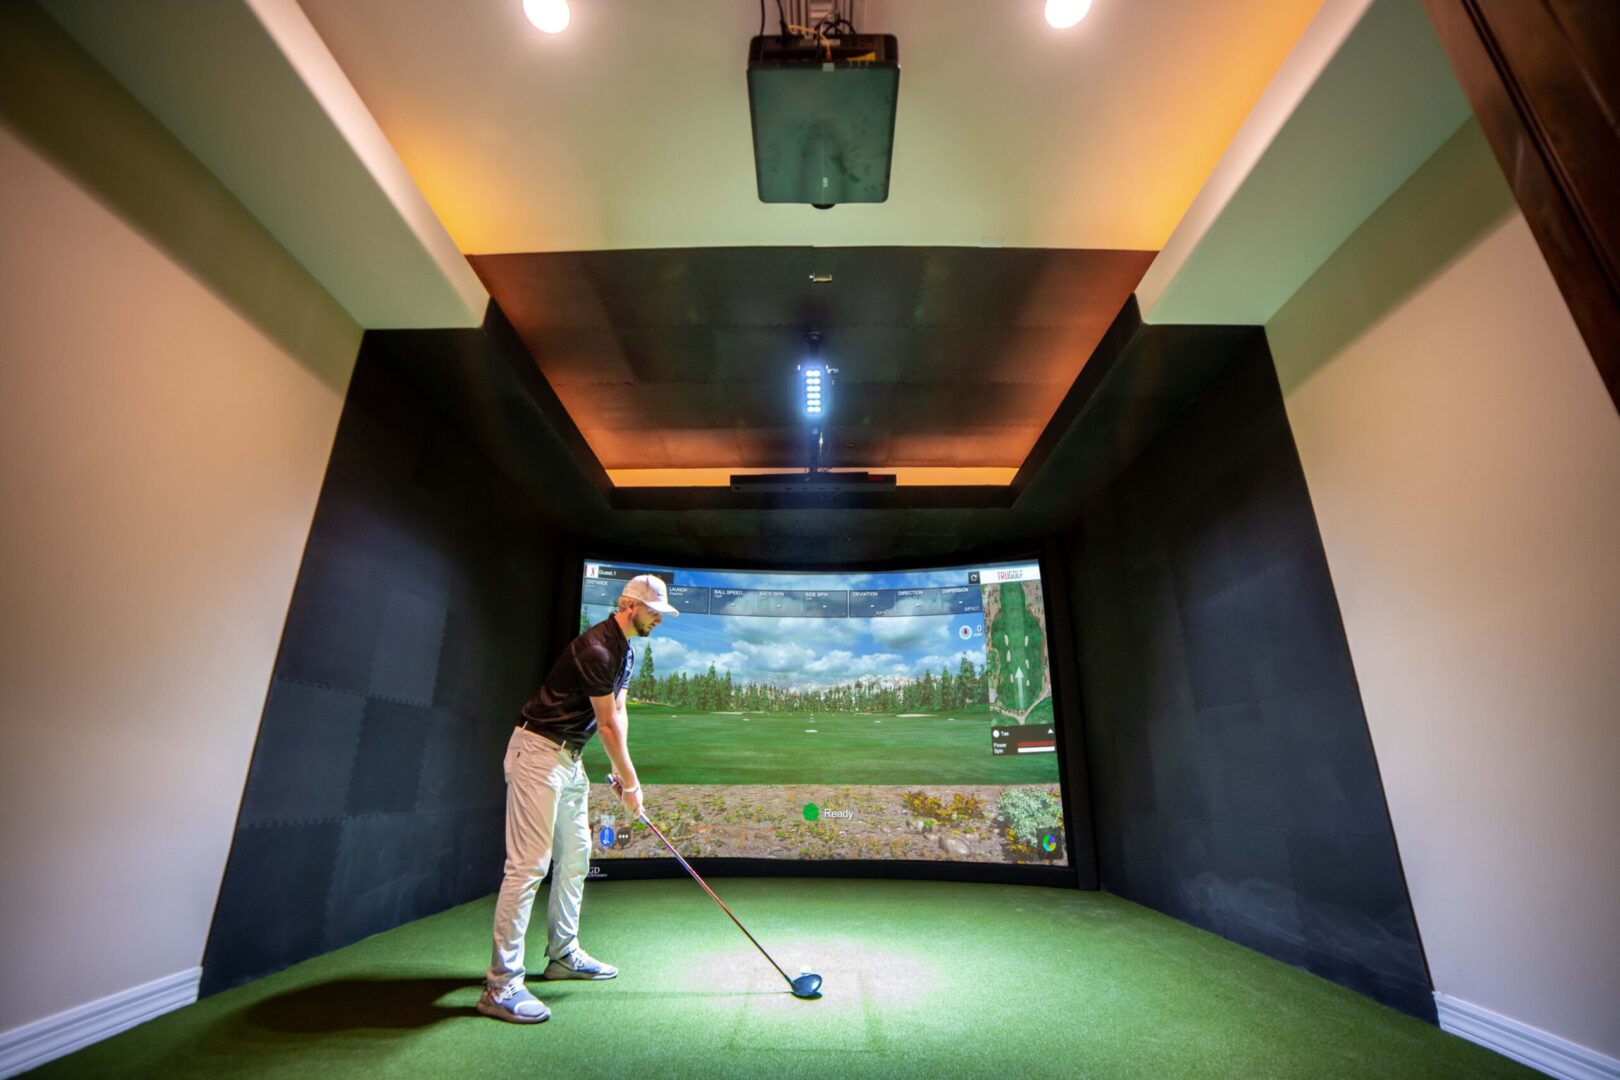 A man is enjoying a game of golf in a state-of-the-art indoor golf simulator.